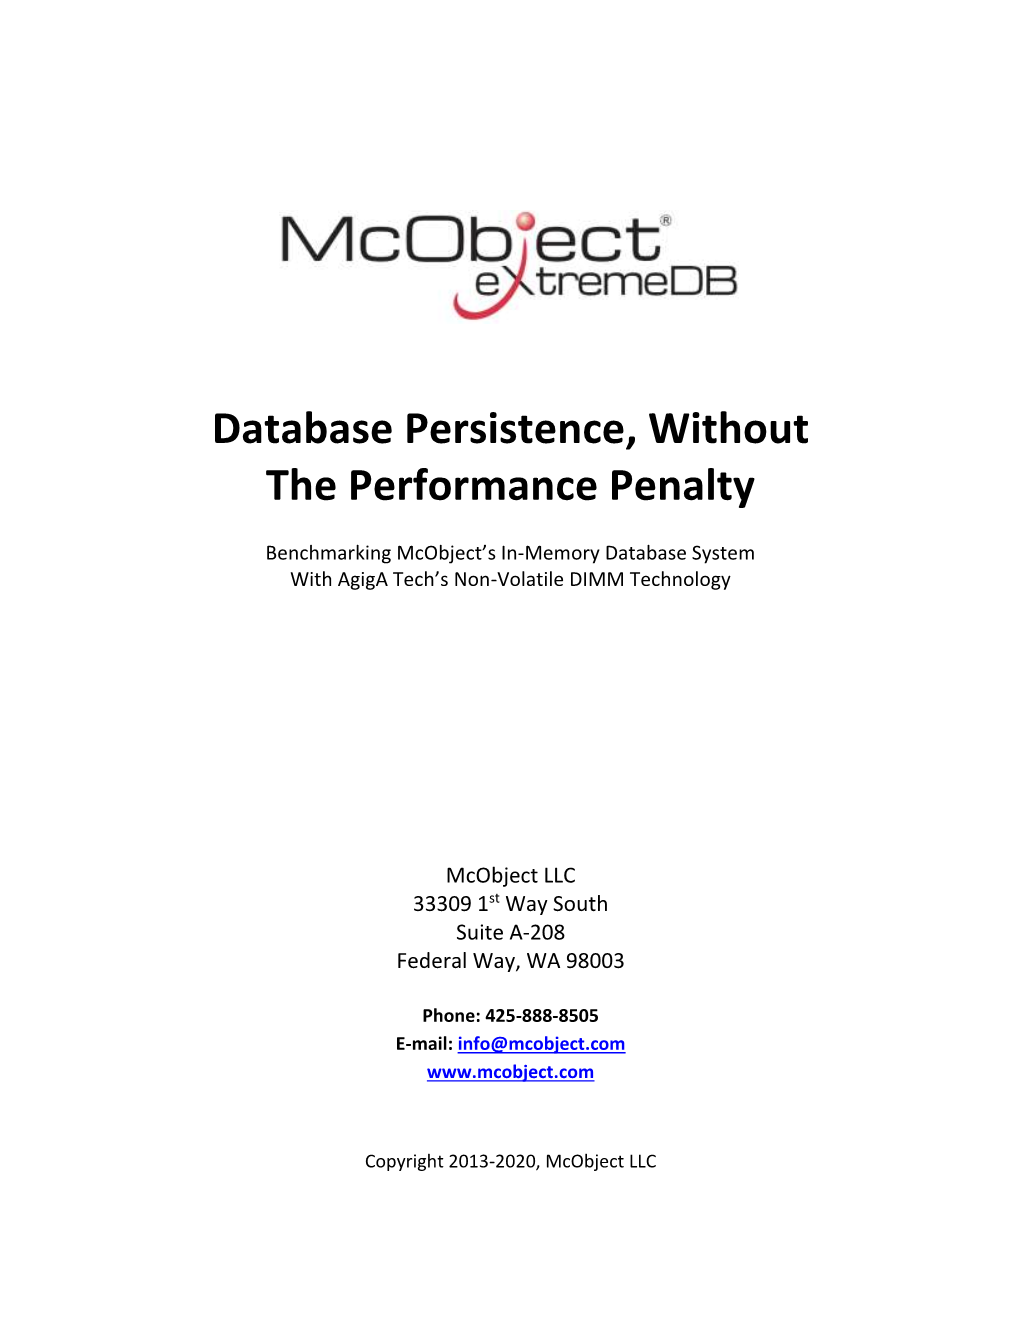 Database Persistence, Without the Performance Penalty